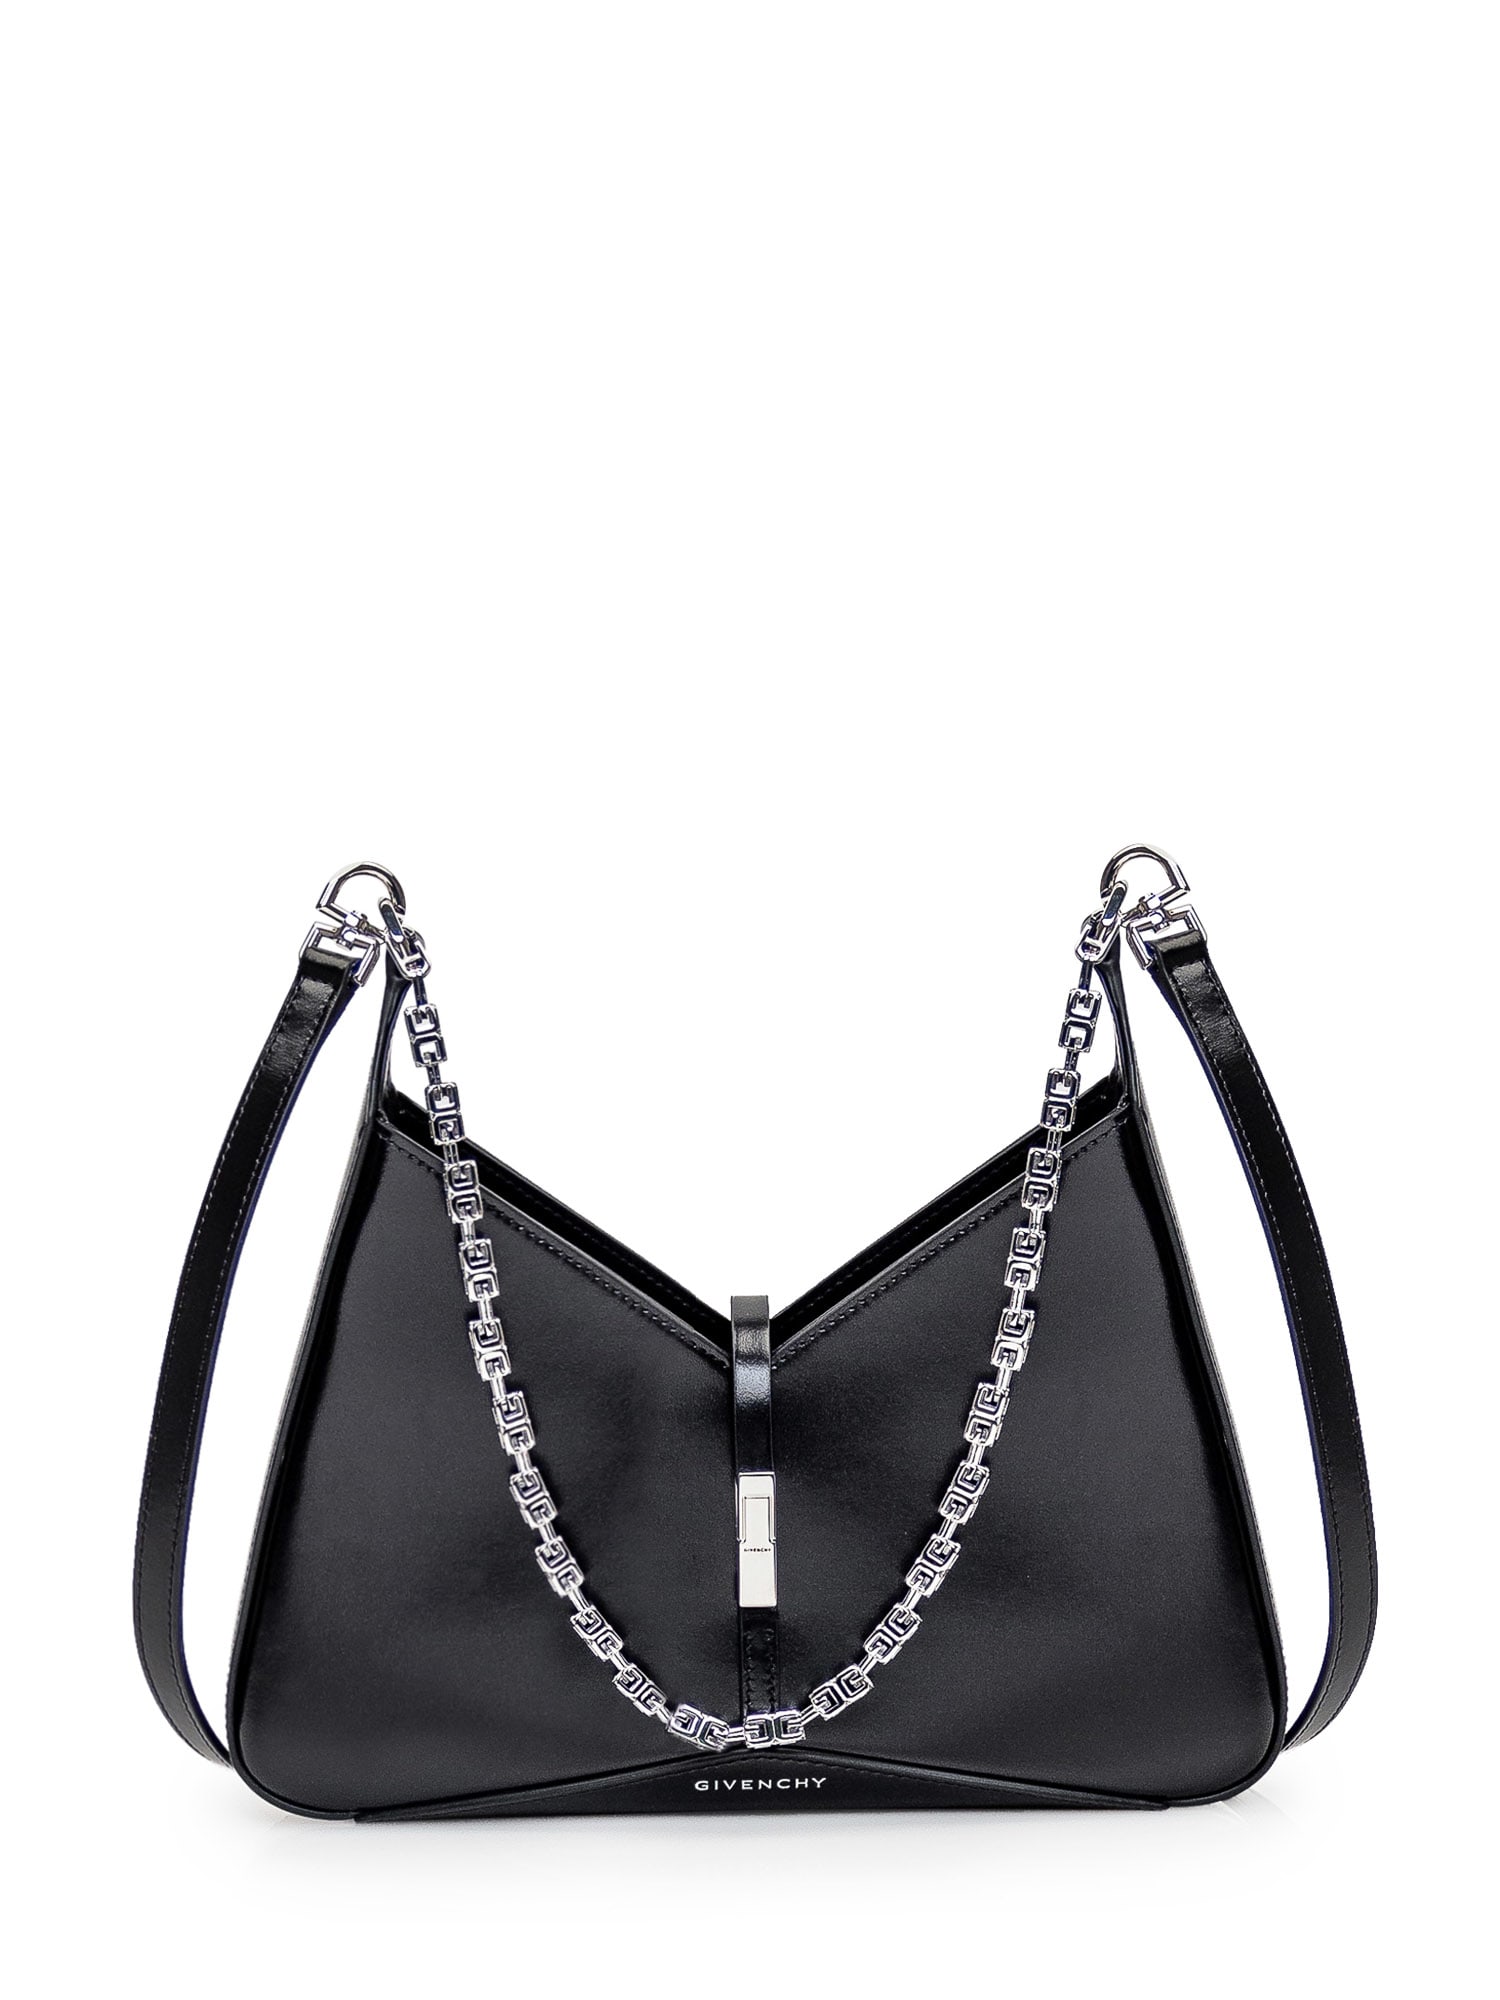 Givenchy Cut Out Bag In Black